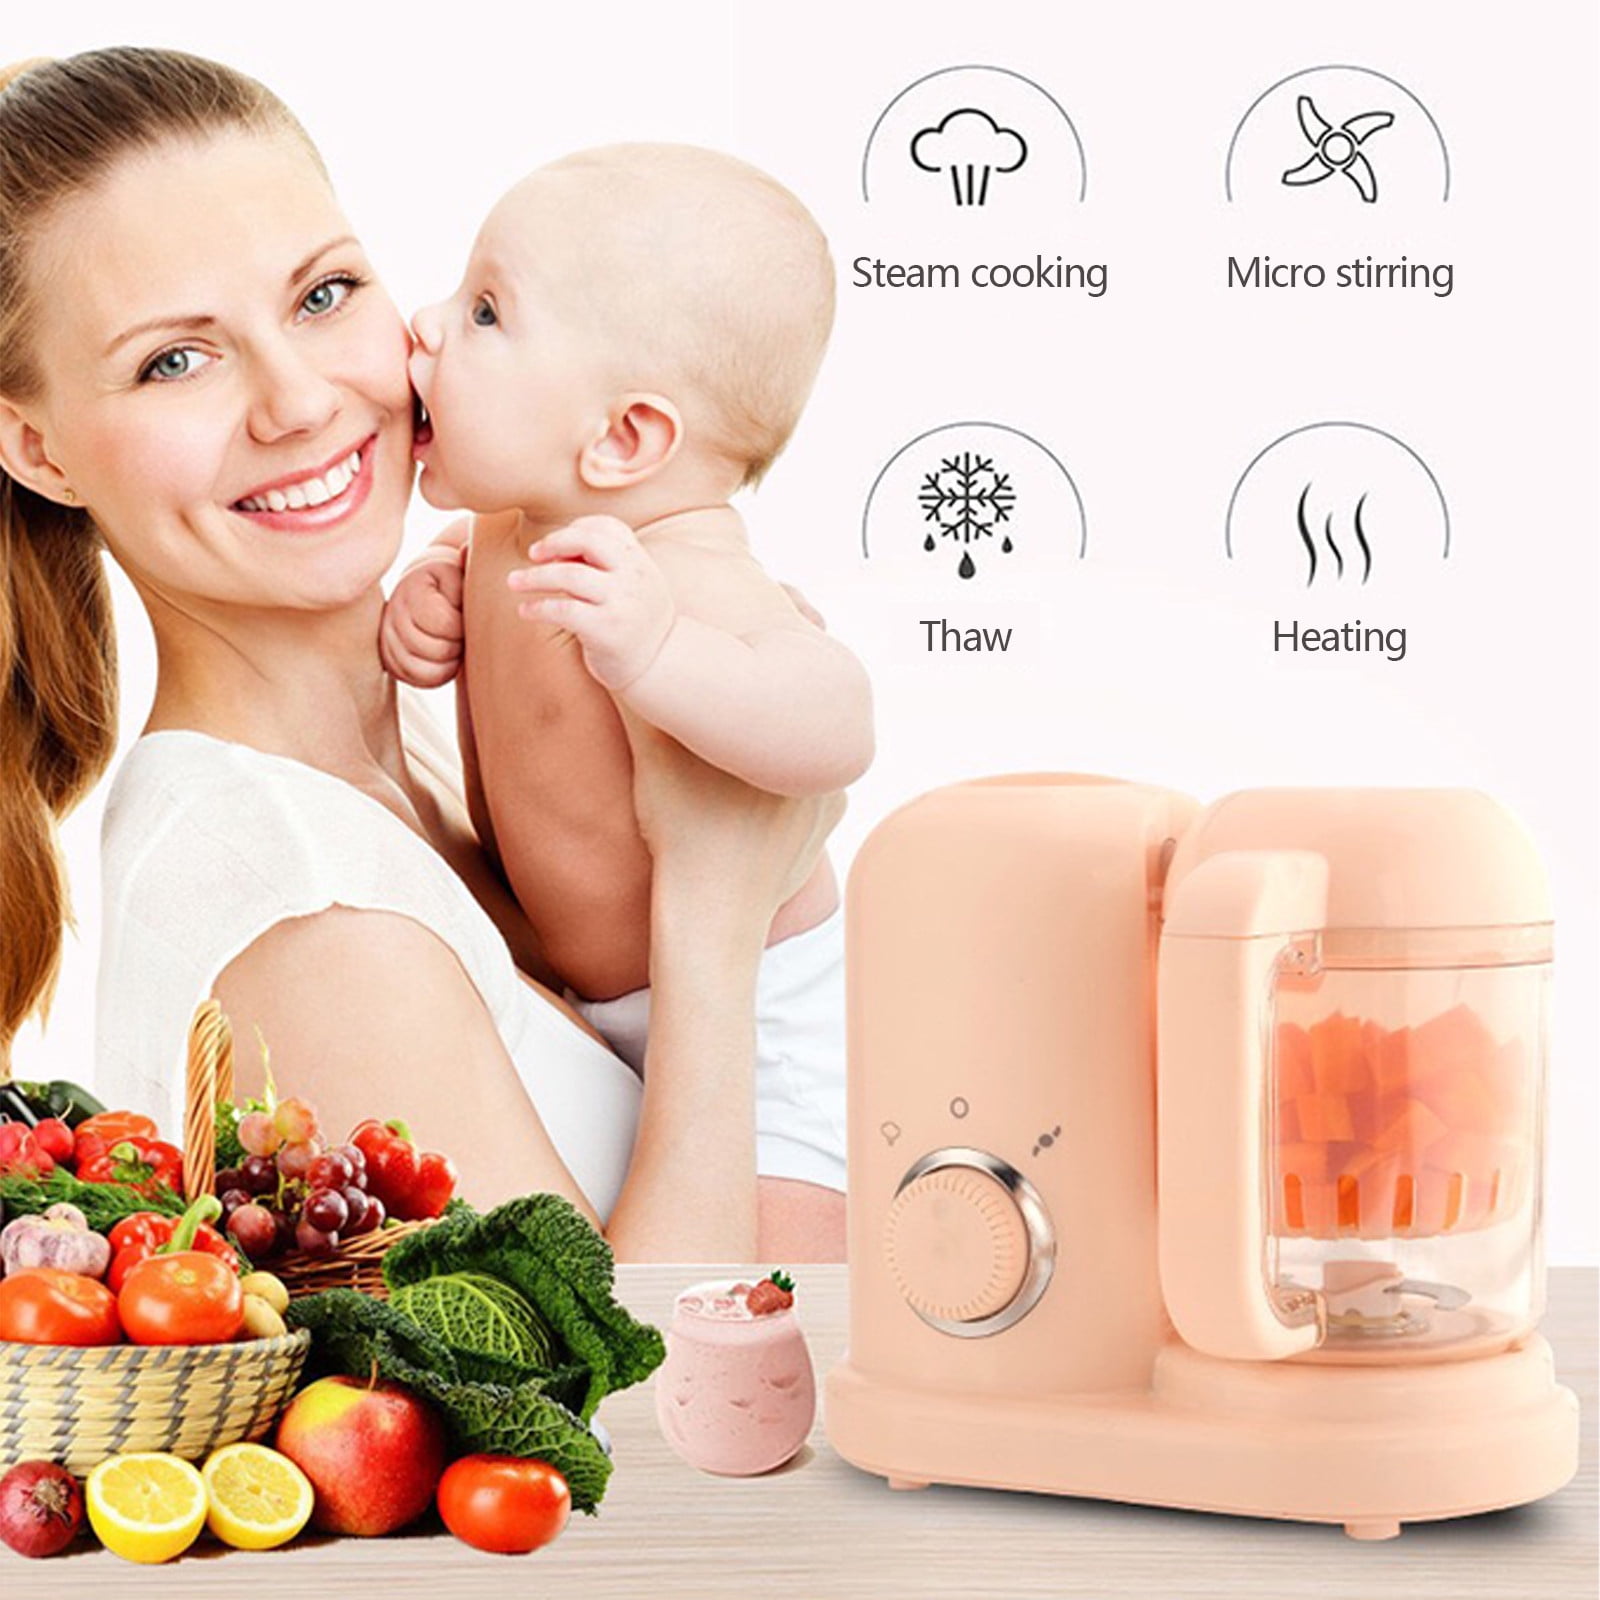 Banghong Baby Food Maker, Maker Puree Food Processor,Steam Cook And Mixer,  Warmer Machine , All-in-one Auto Cooking, Auto Cooking & Grinding